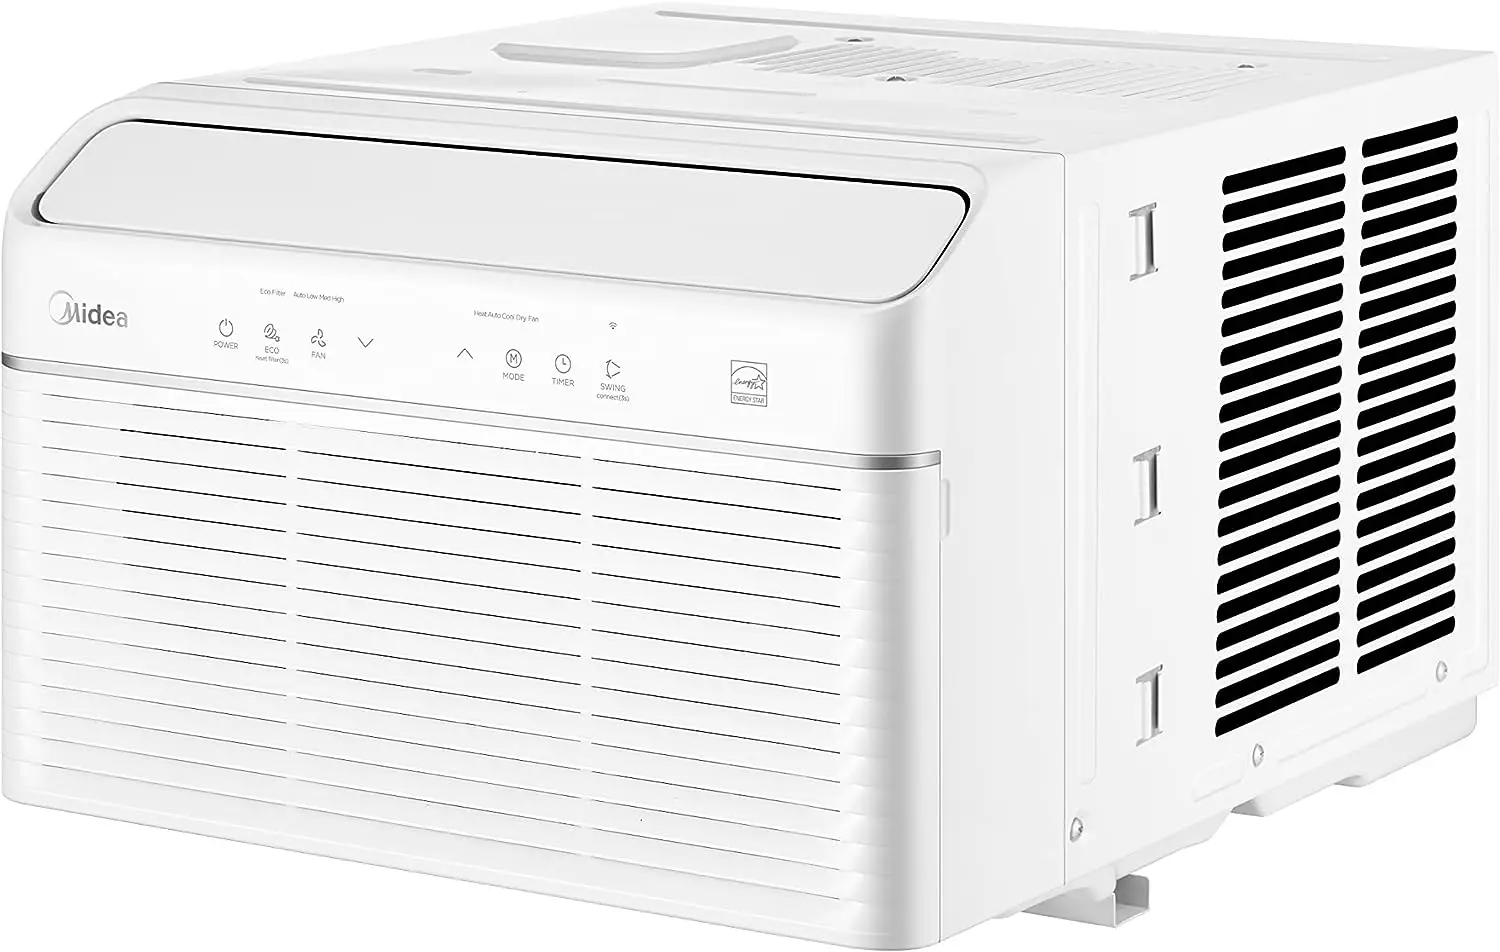 

12000 BTU Smart Inverter Air Conditioner Window Unit with Heat and Dehumidifier \u2013 Cools up to 550 Sq. Ft., Energy Star Rate